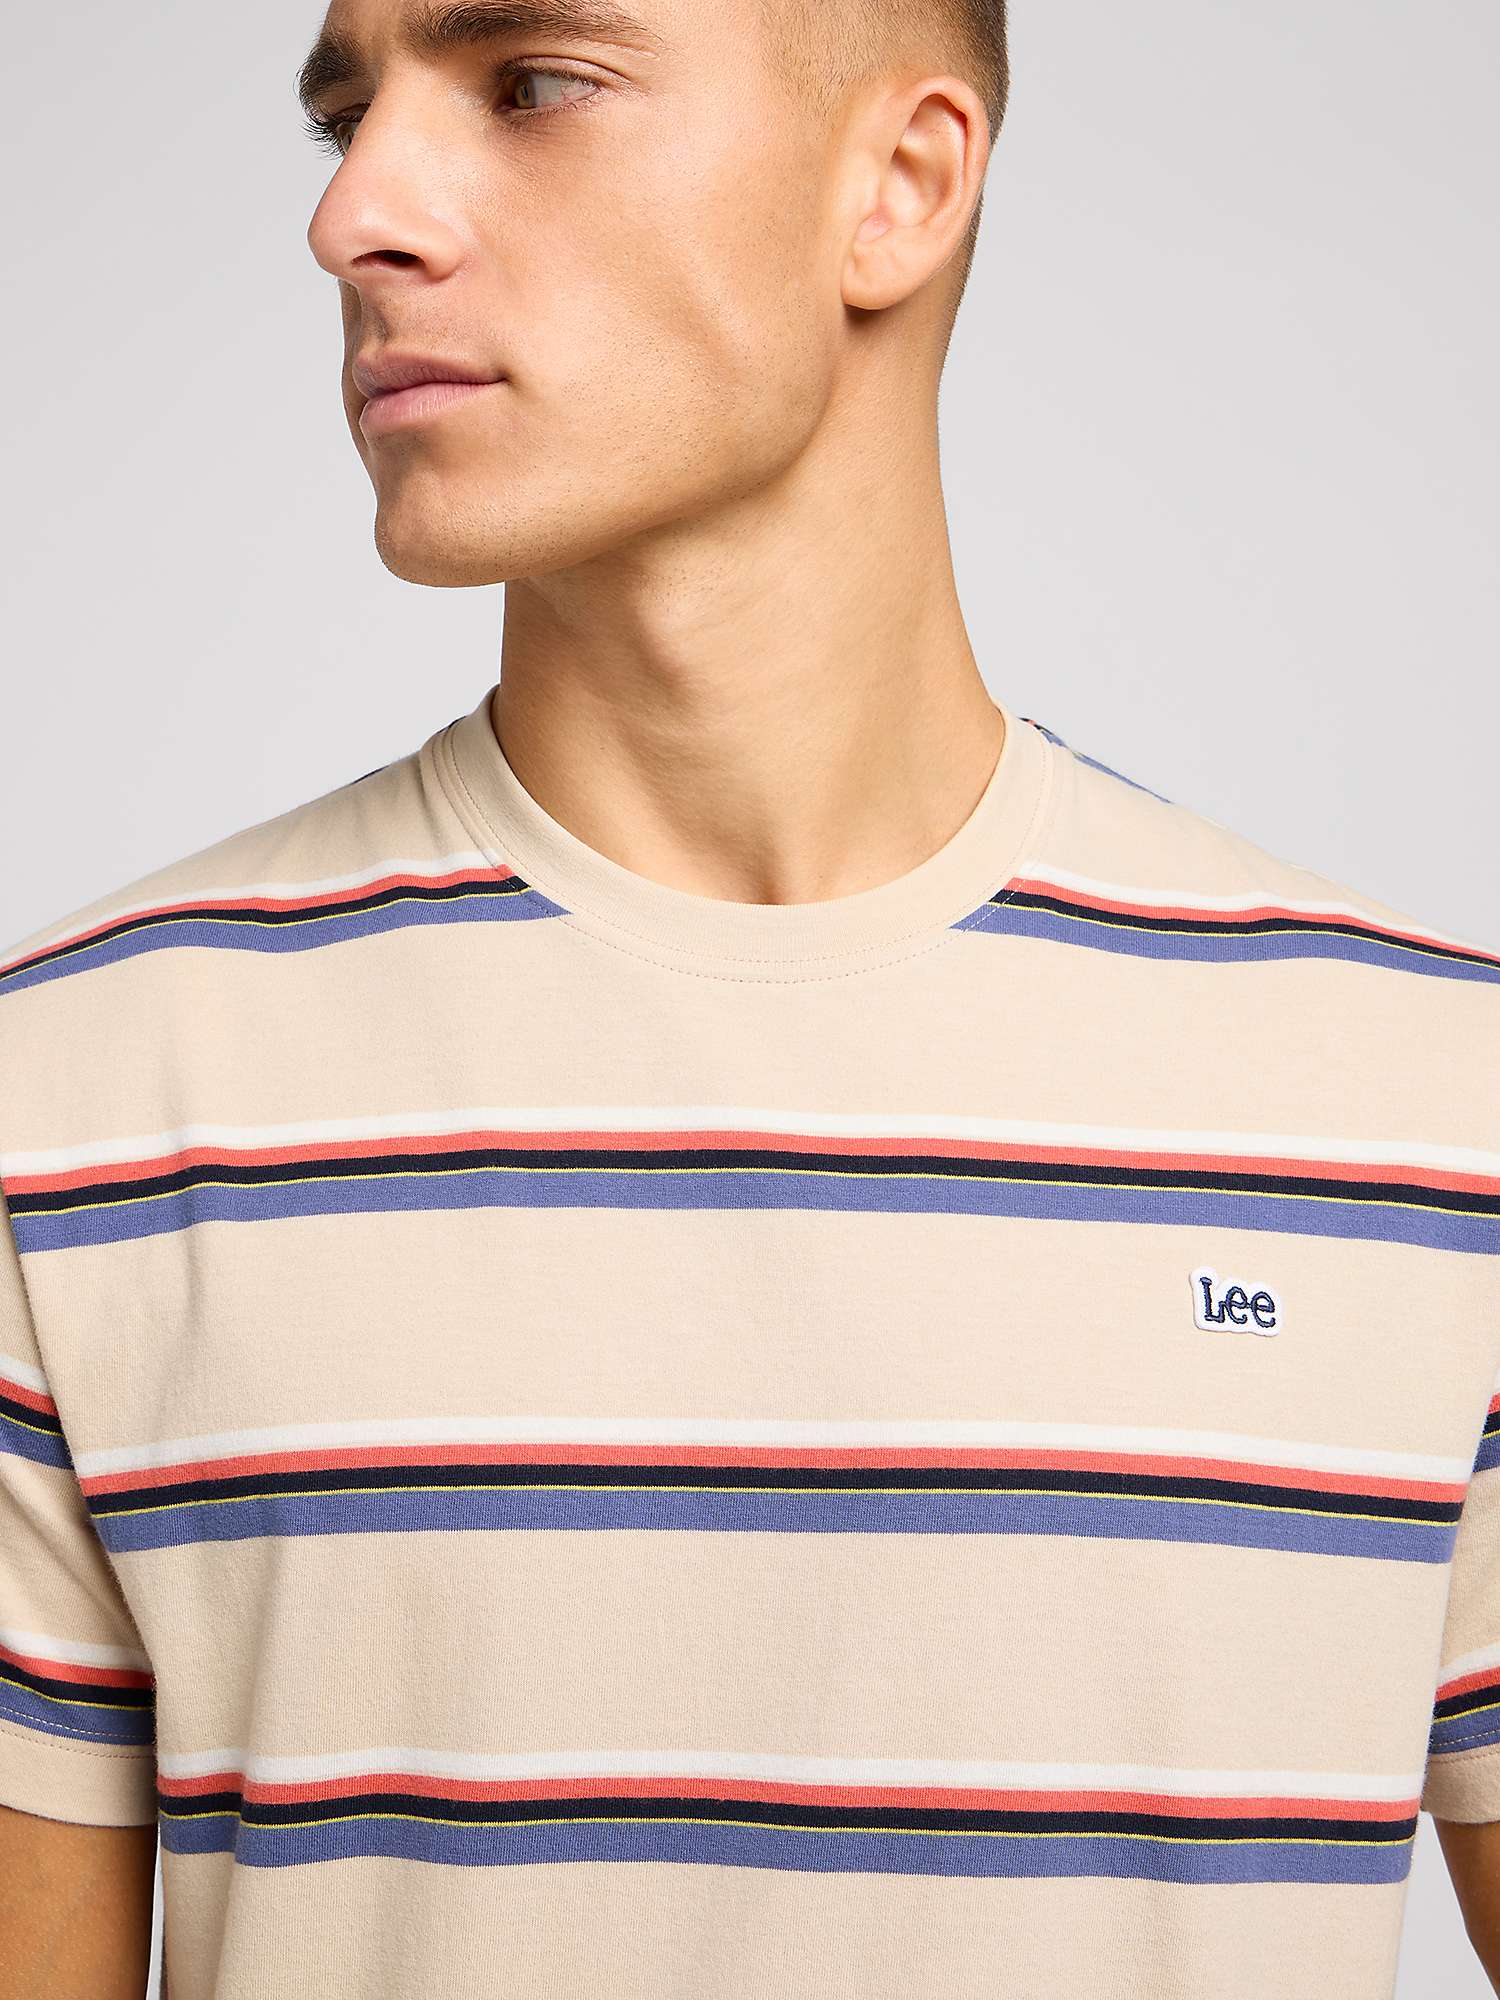 Buy Lee Relaxed Double Stripe T-Shirt, Multi Online at johnlewis.com